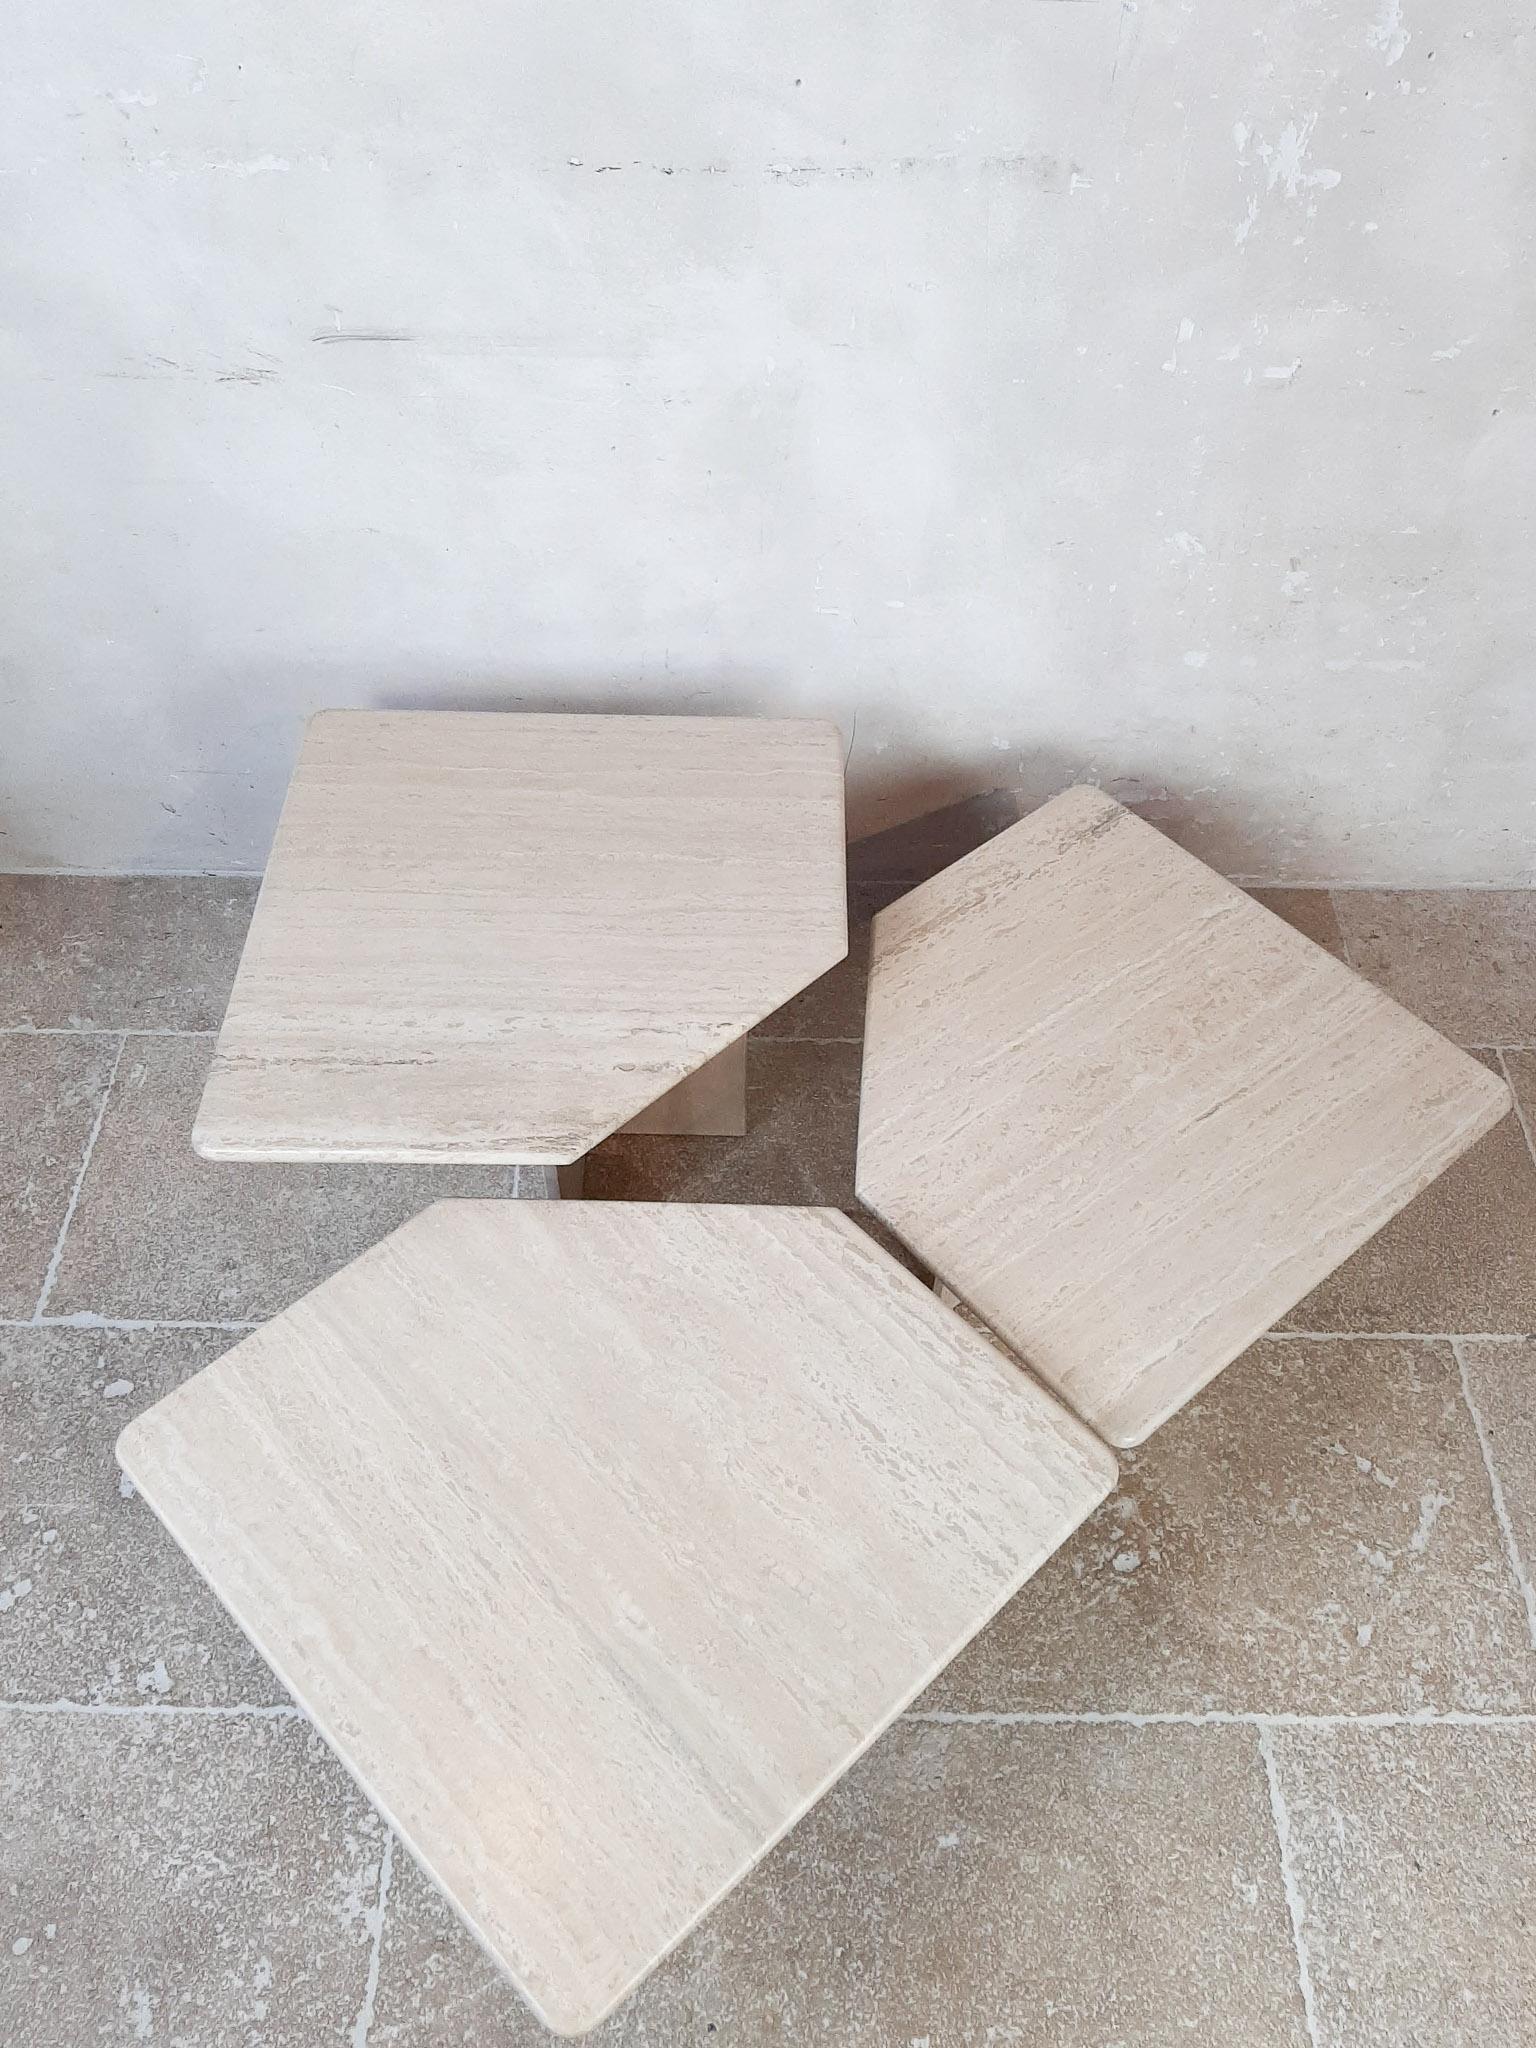 Set of 3 Hollywood Regency, vintage design travertine coffee tables or side tables, to be used as a group. From the 70s.

Measures: L 60 x W 60 cm
in 3 heights: 40 cm, 35 cm and 30 cm.